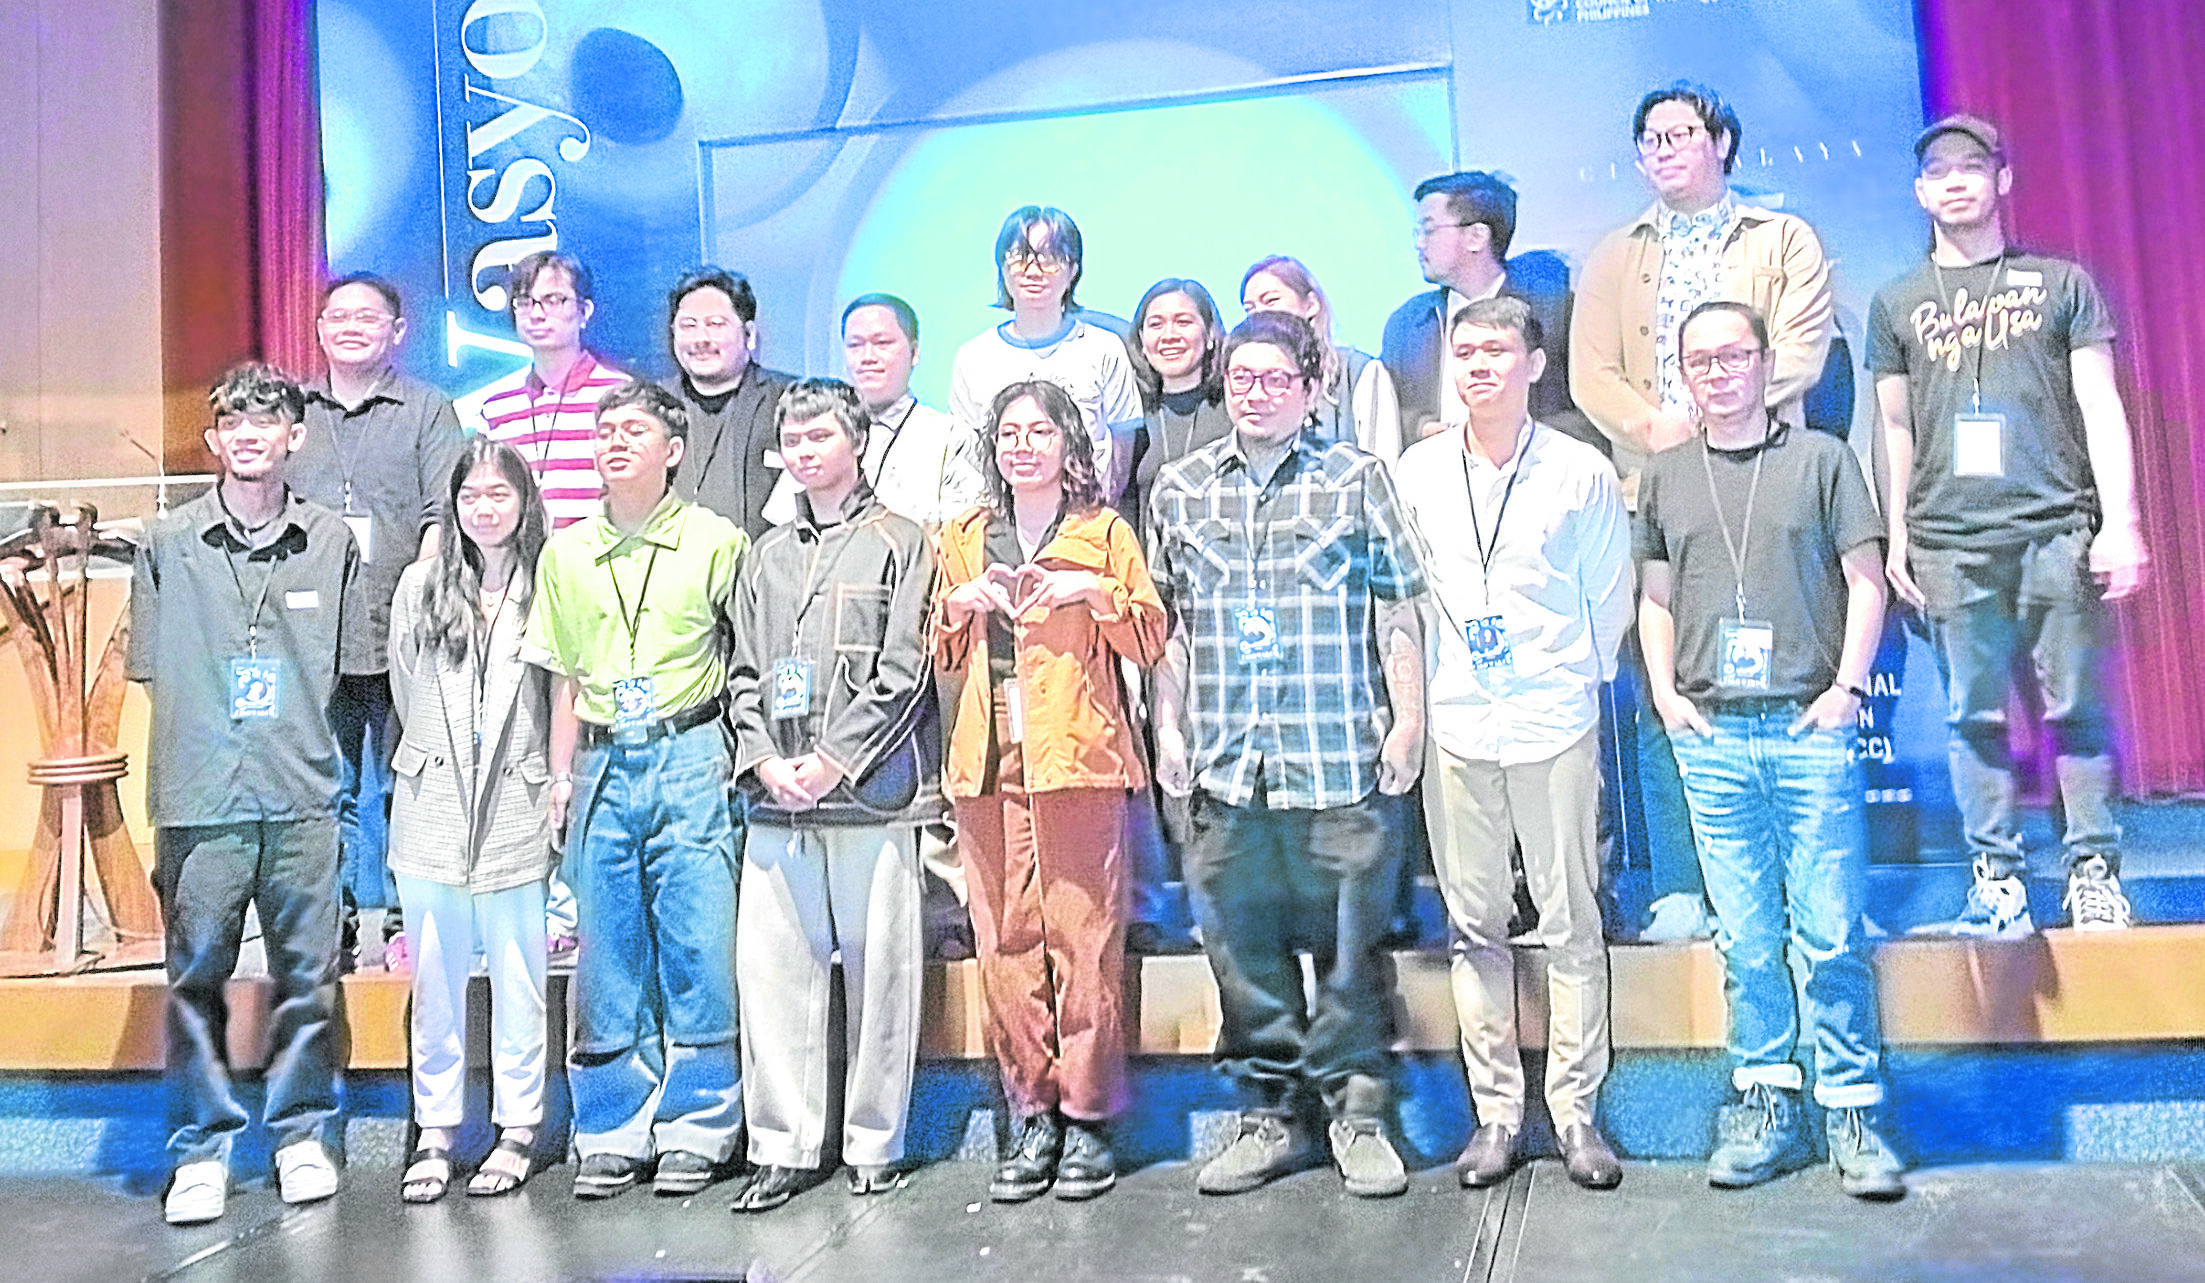 Finalists in the upcoming Cinemalaya competition, with the directors of full-length features in front and the short film directors in the second row